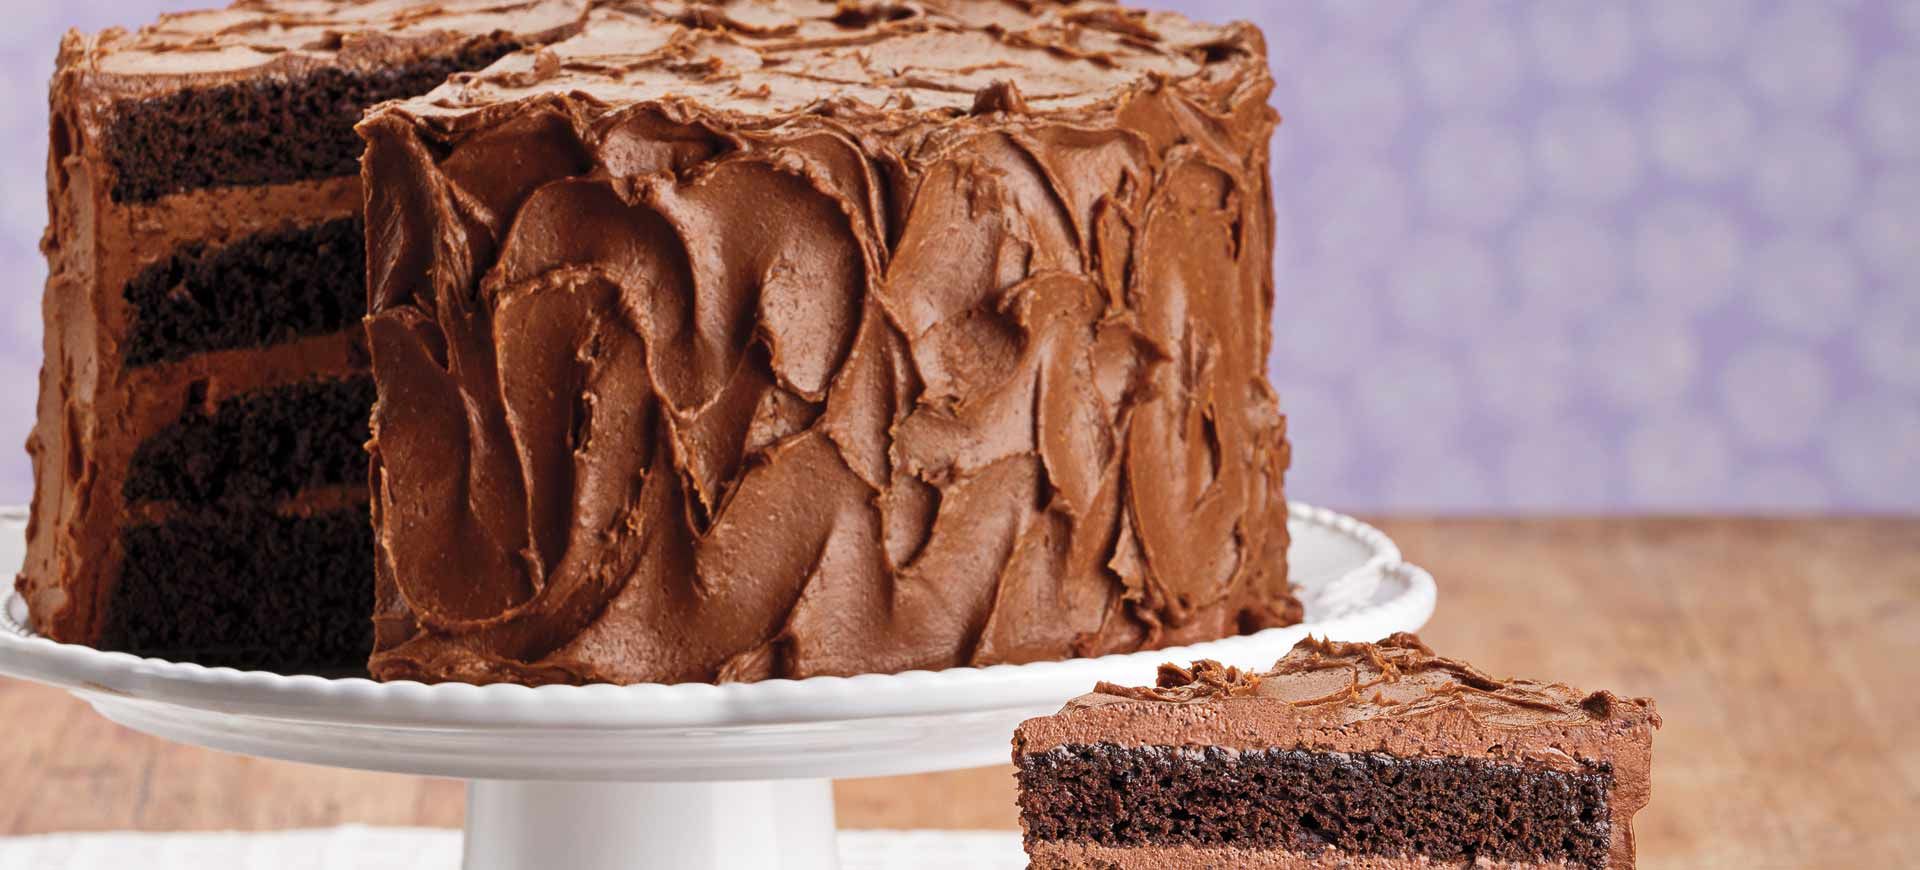 Deluxe Chocolate Split Layer Cake with Chocolate Buttercream Frosting